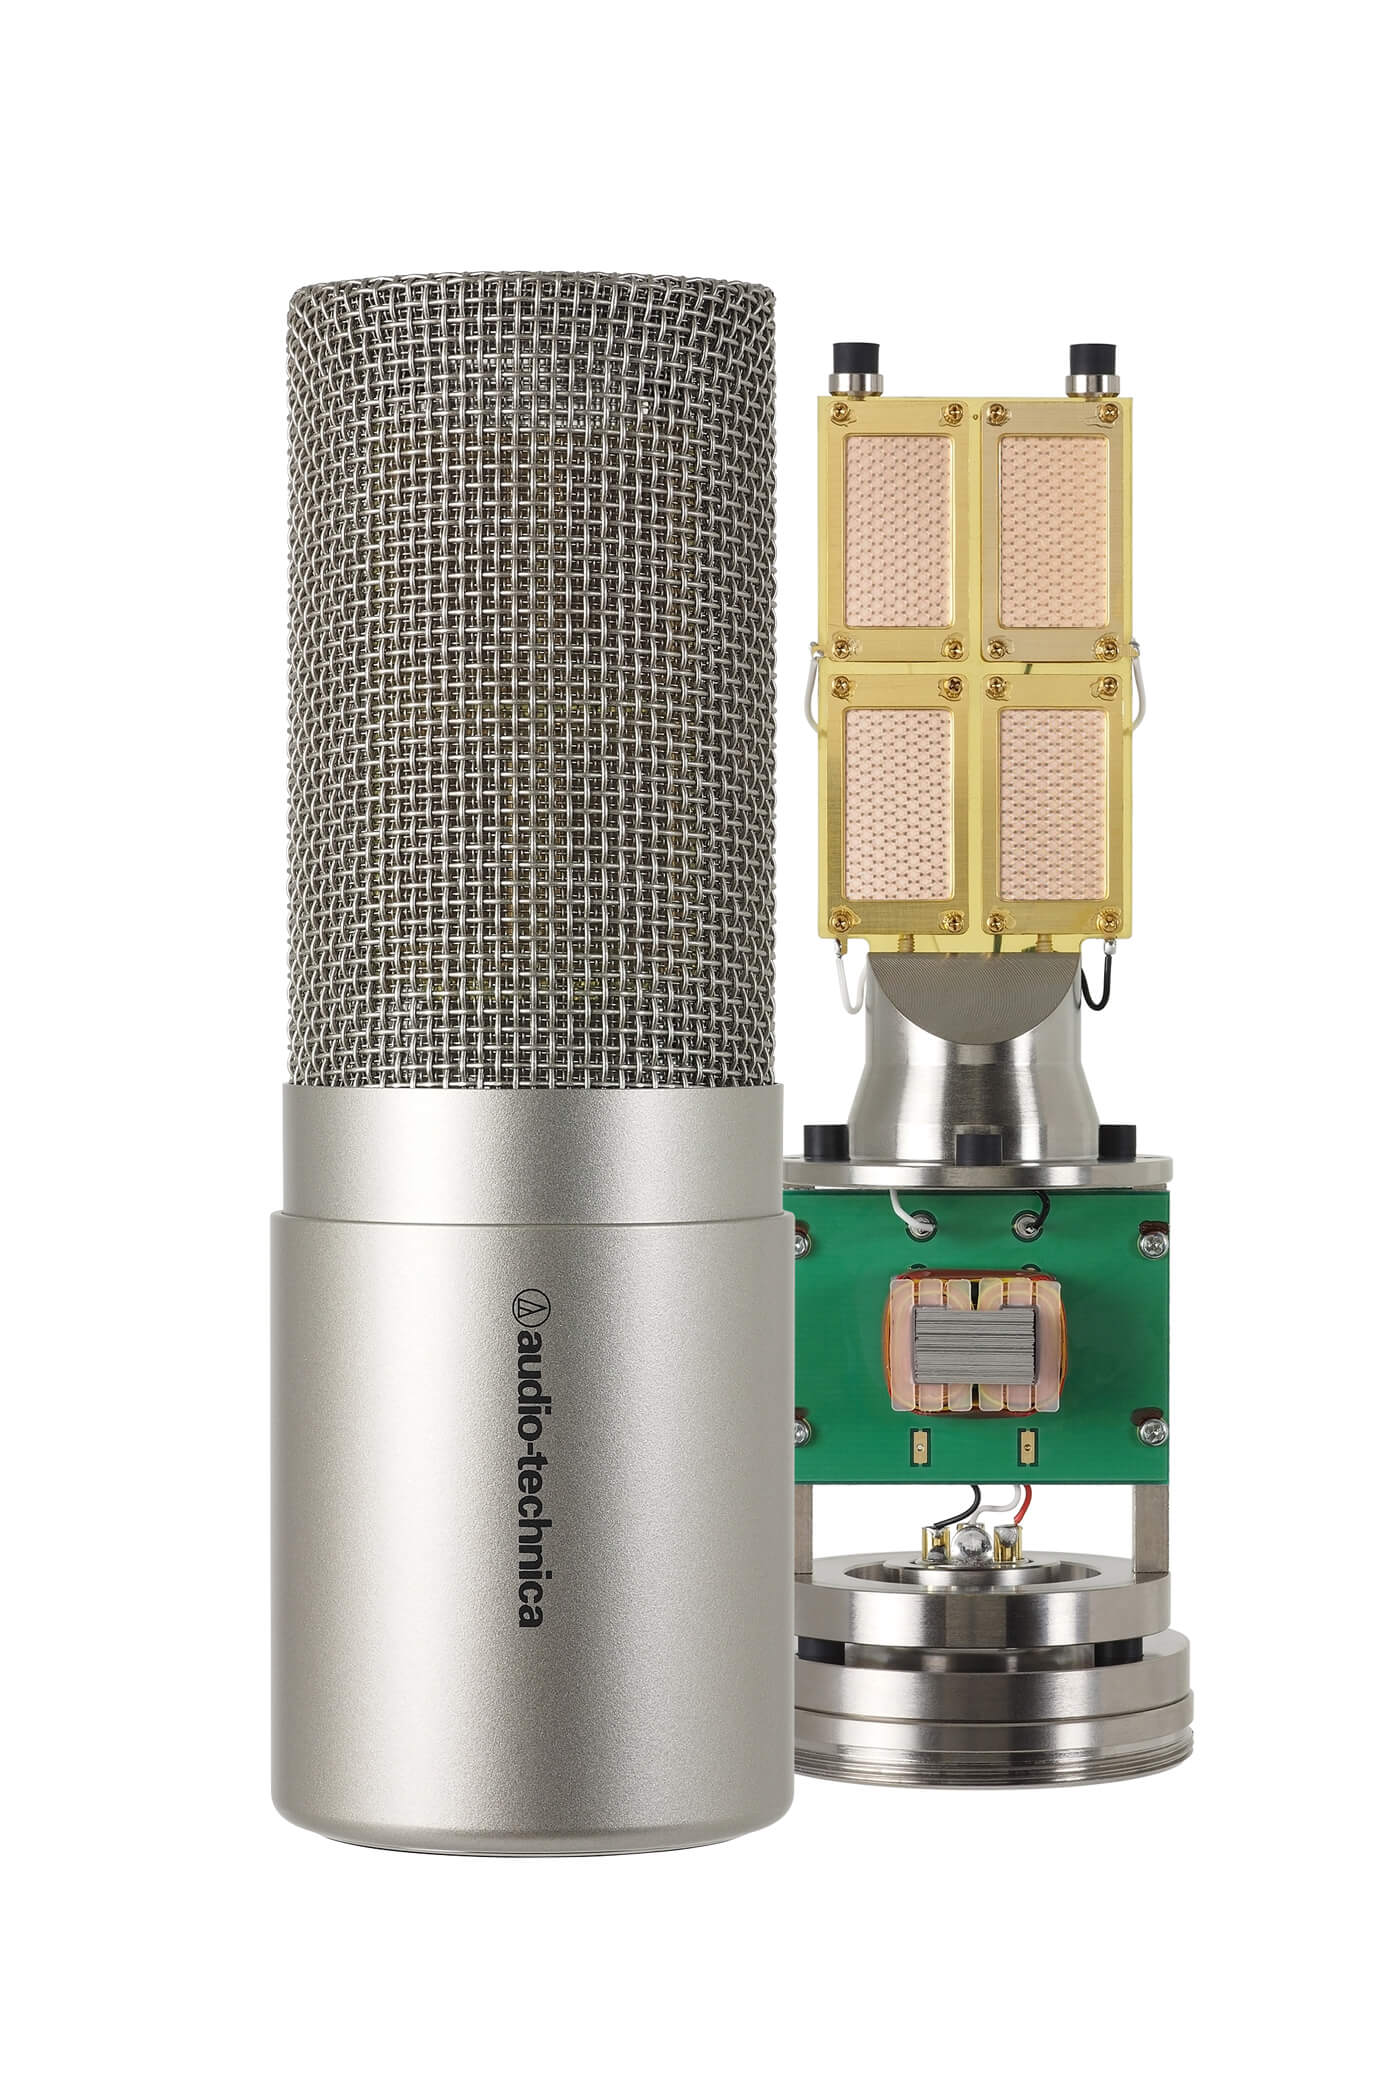 Audio-Technica ships new AT5047 cardioid condenser microphone